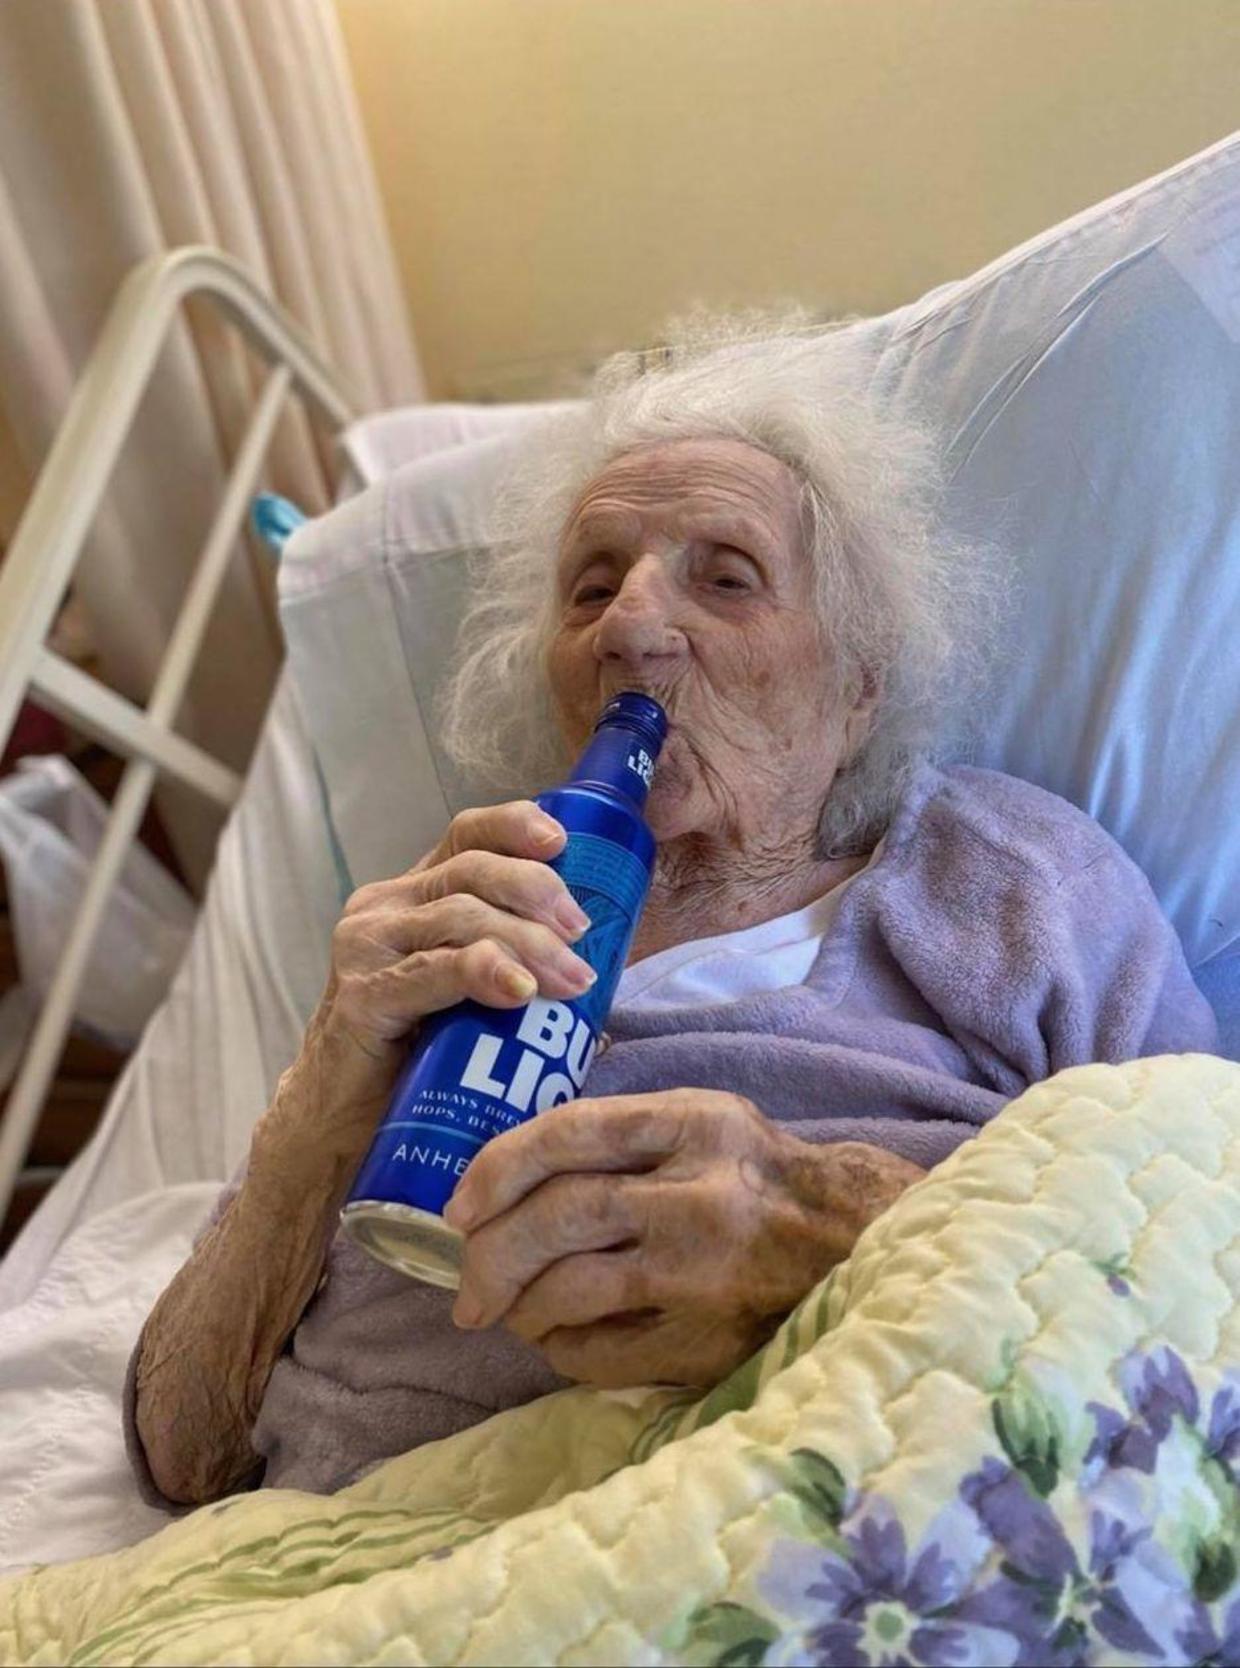 When the 103-year-old recovered, she asked her caretakers for one thing: A Bud Light.